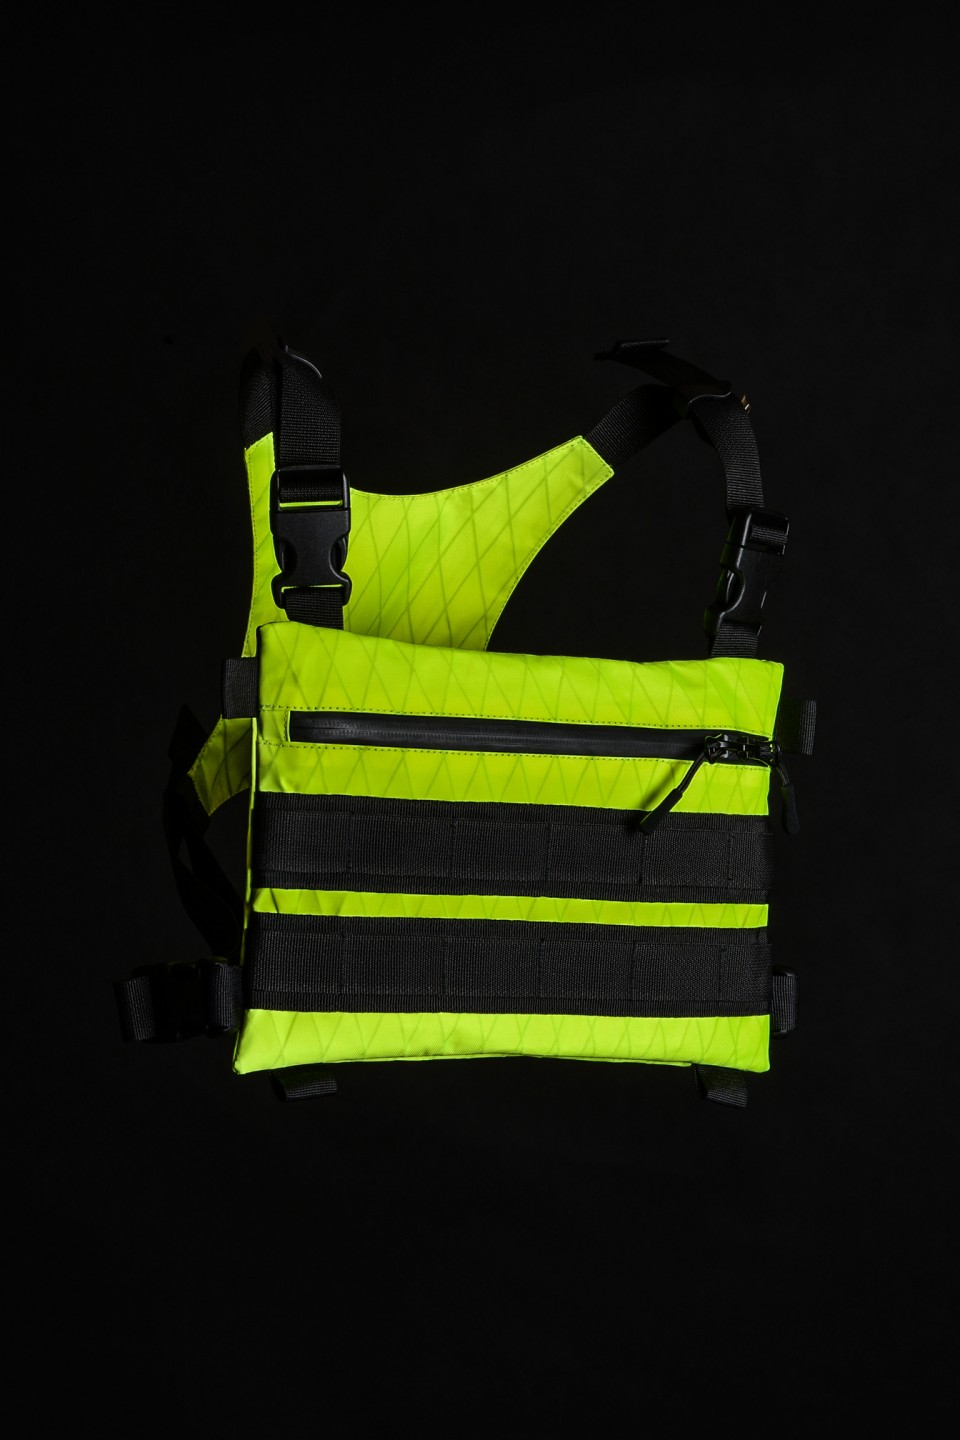 VX25 chest rig